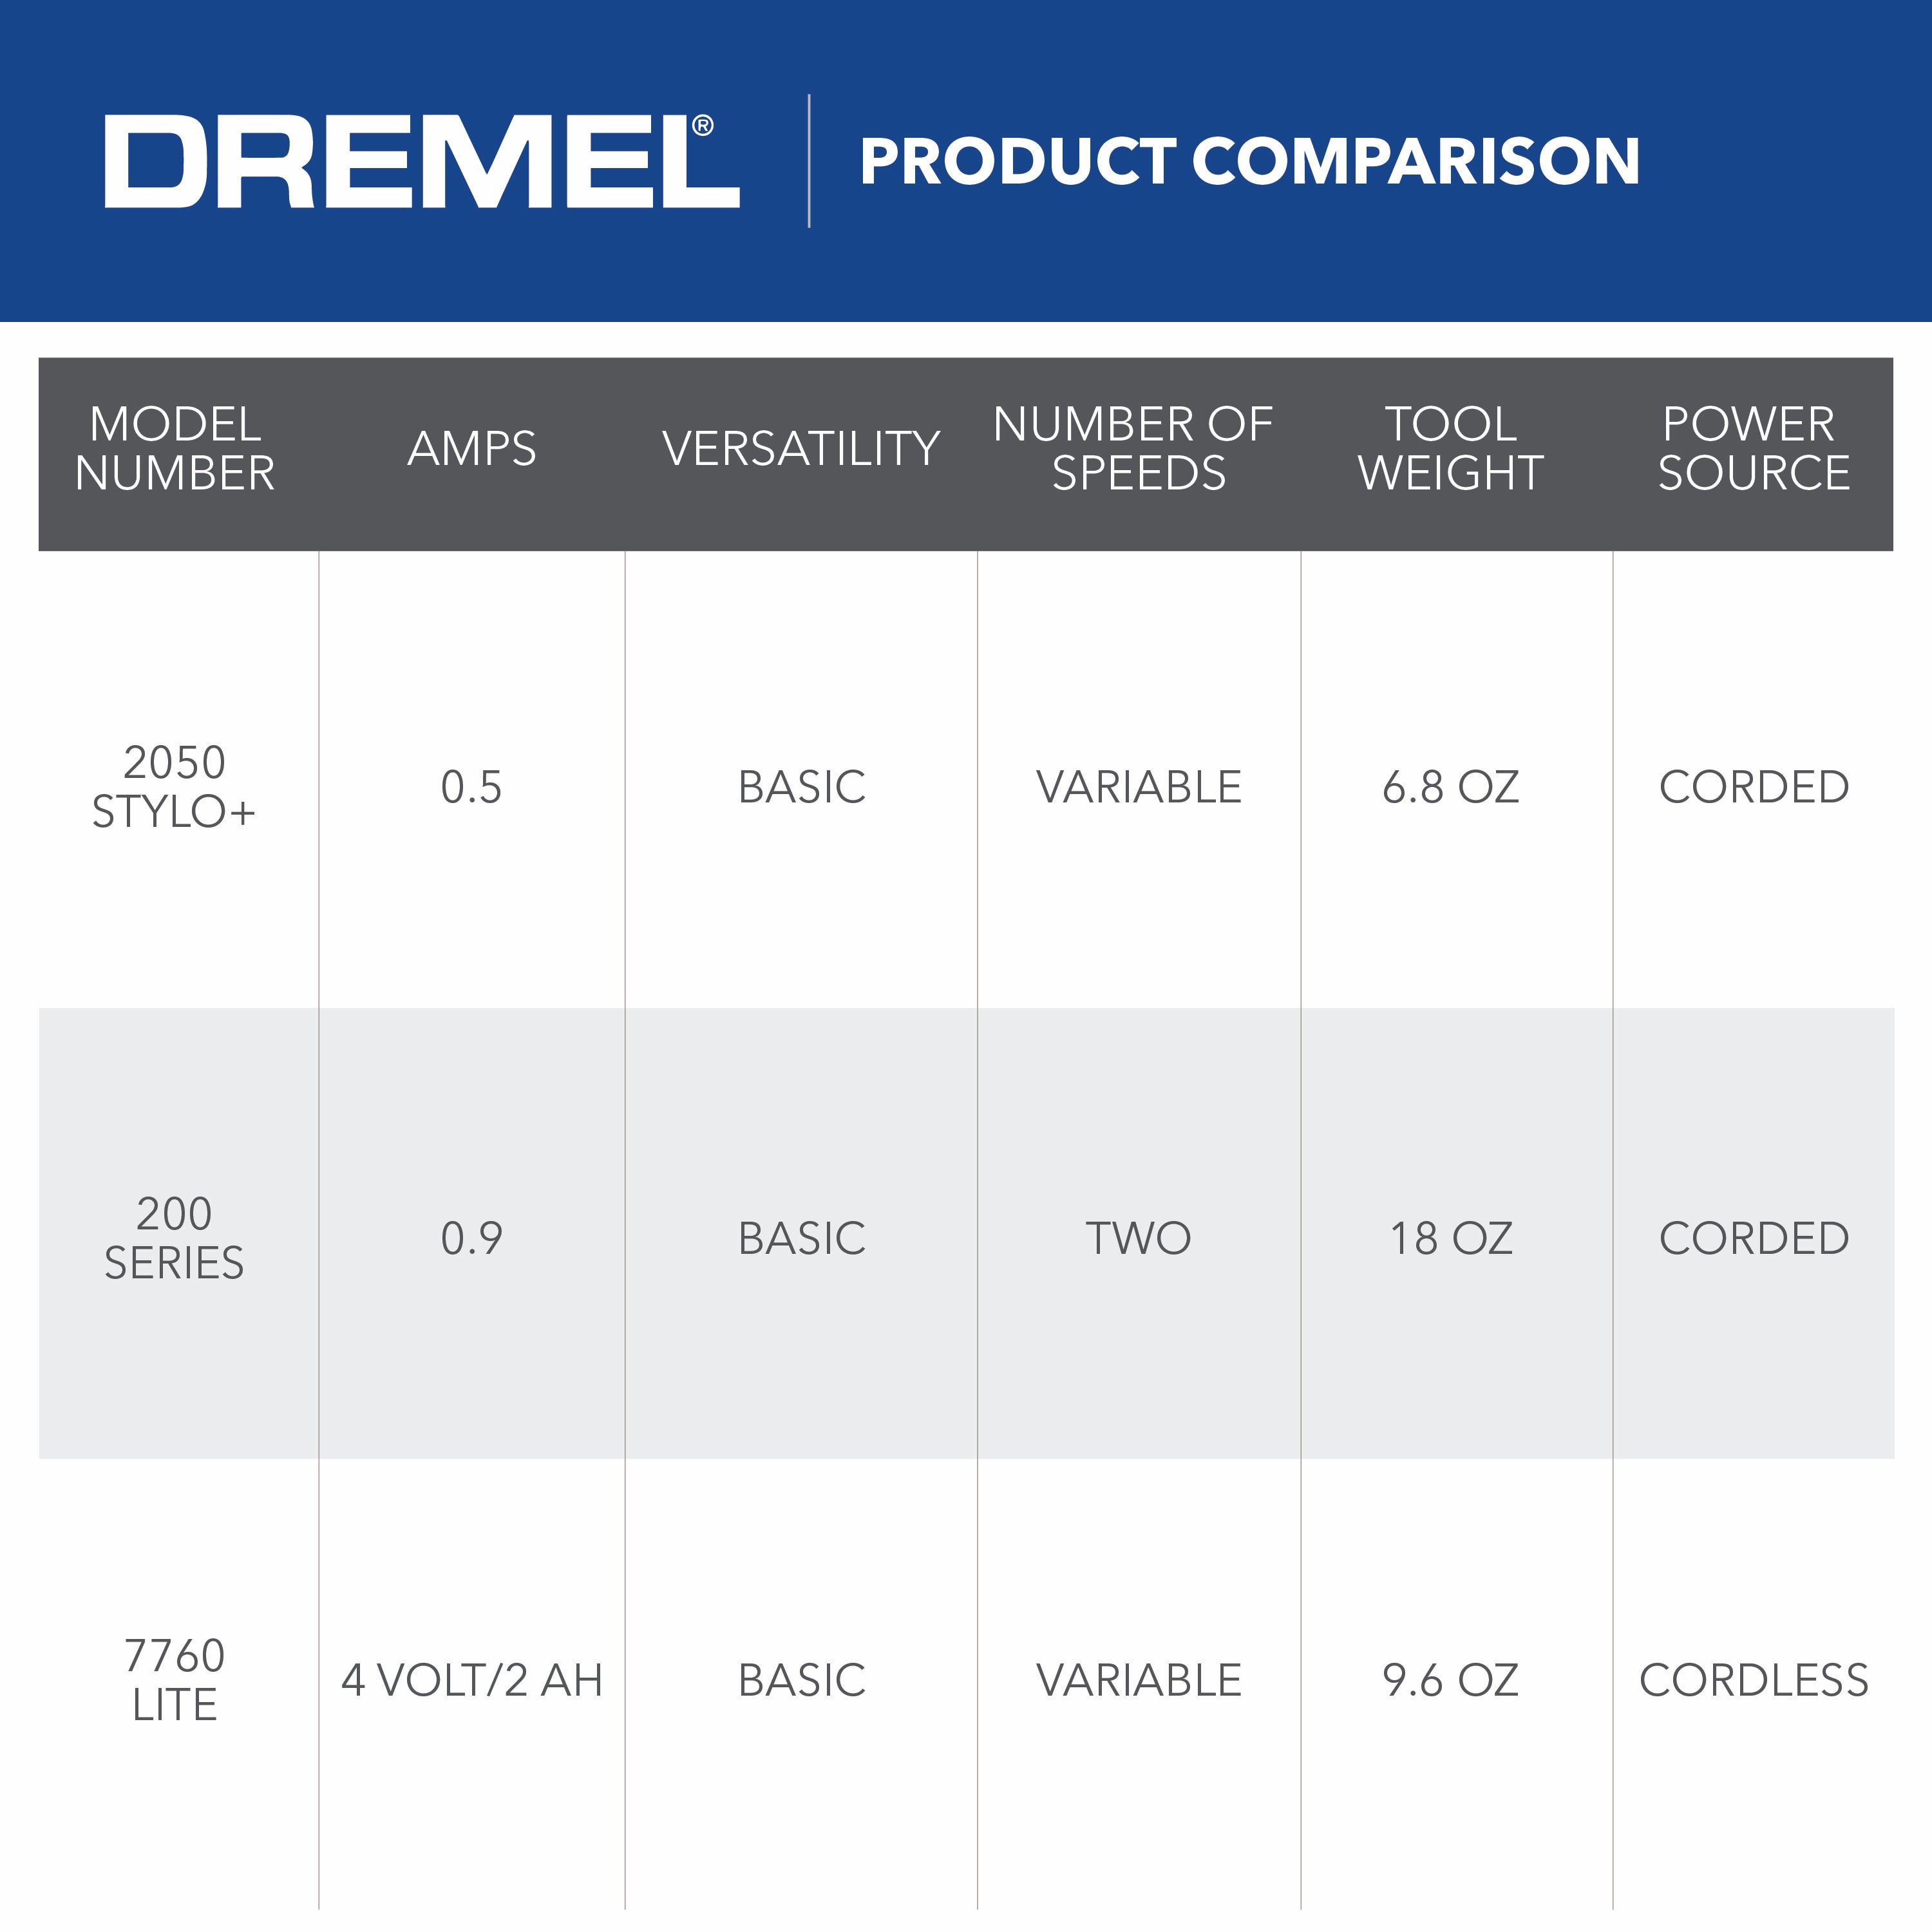 Reviews for Dremel Stylo+ Versatile Corded Craft Rotary Tool Kit